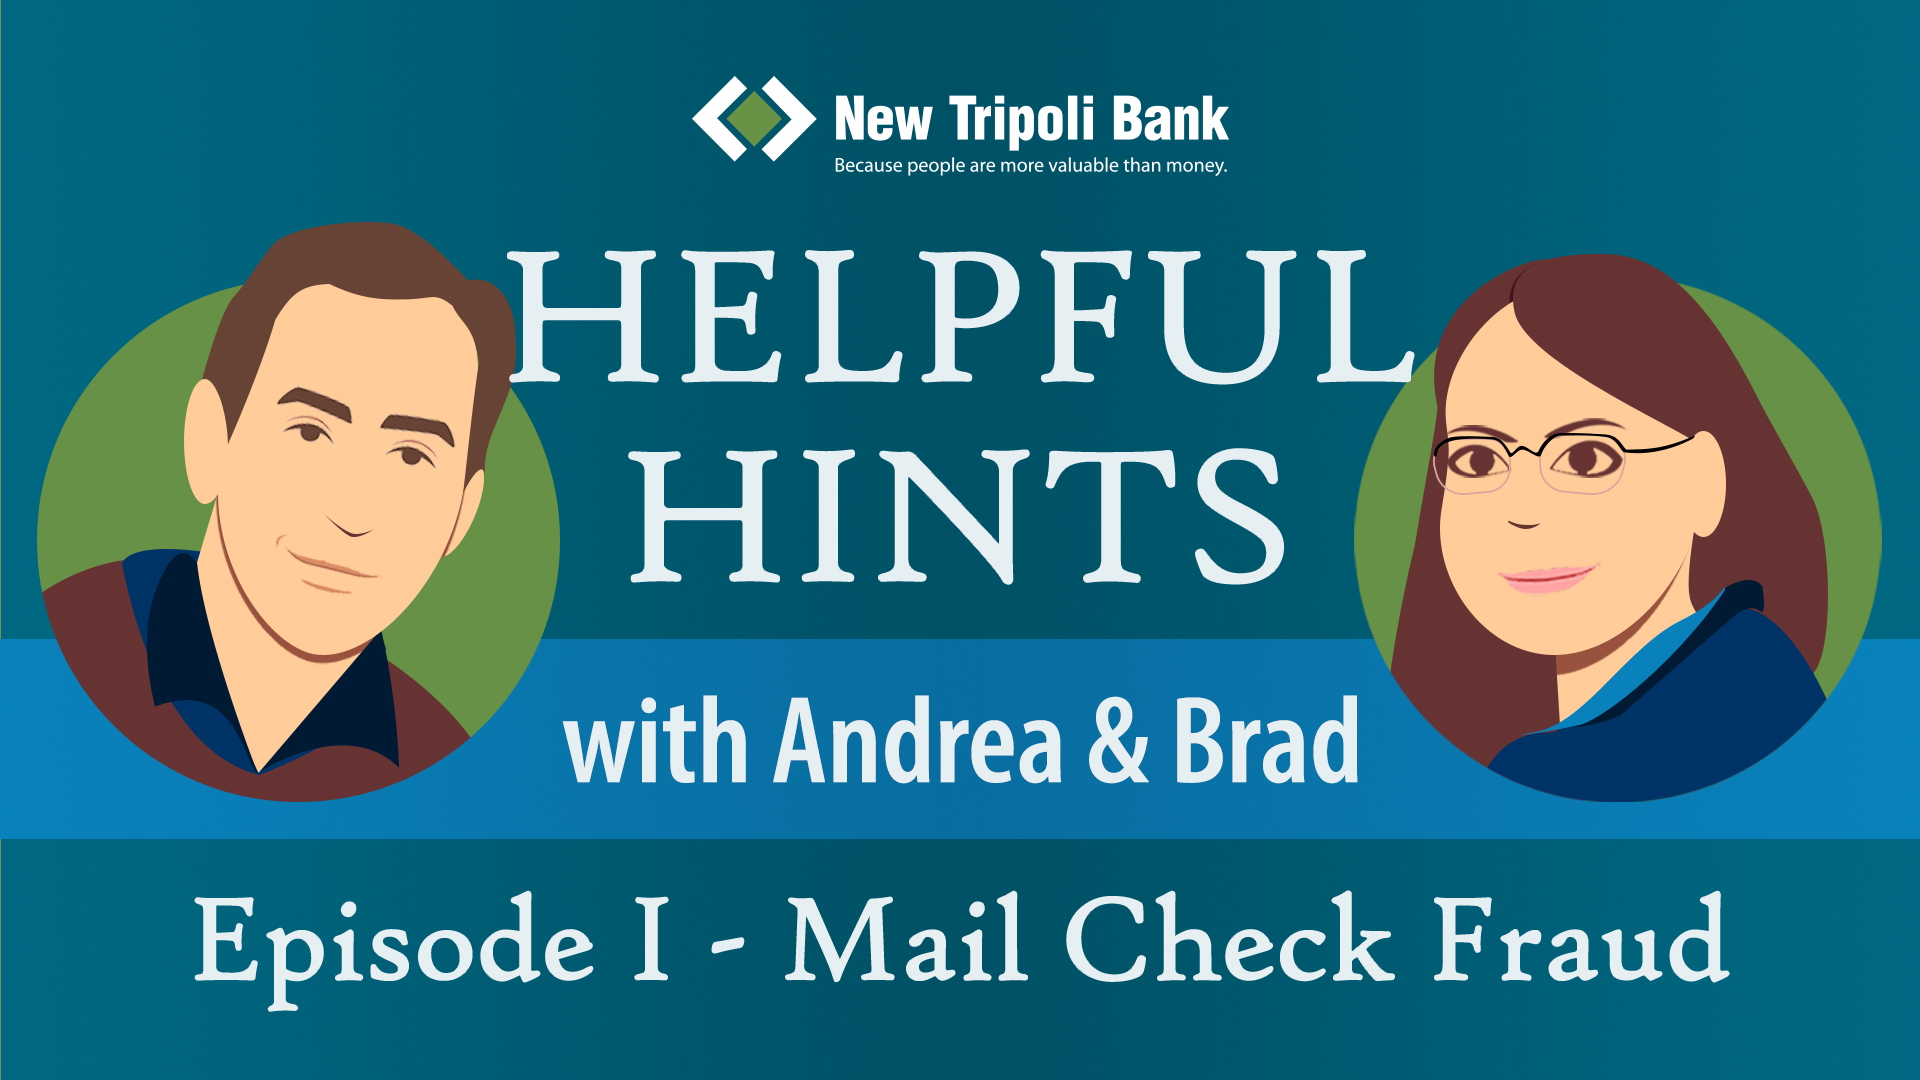 Helpful Hints Mail Check Fraud video